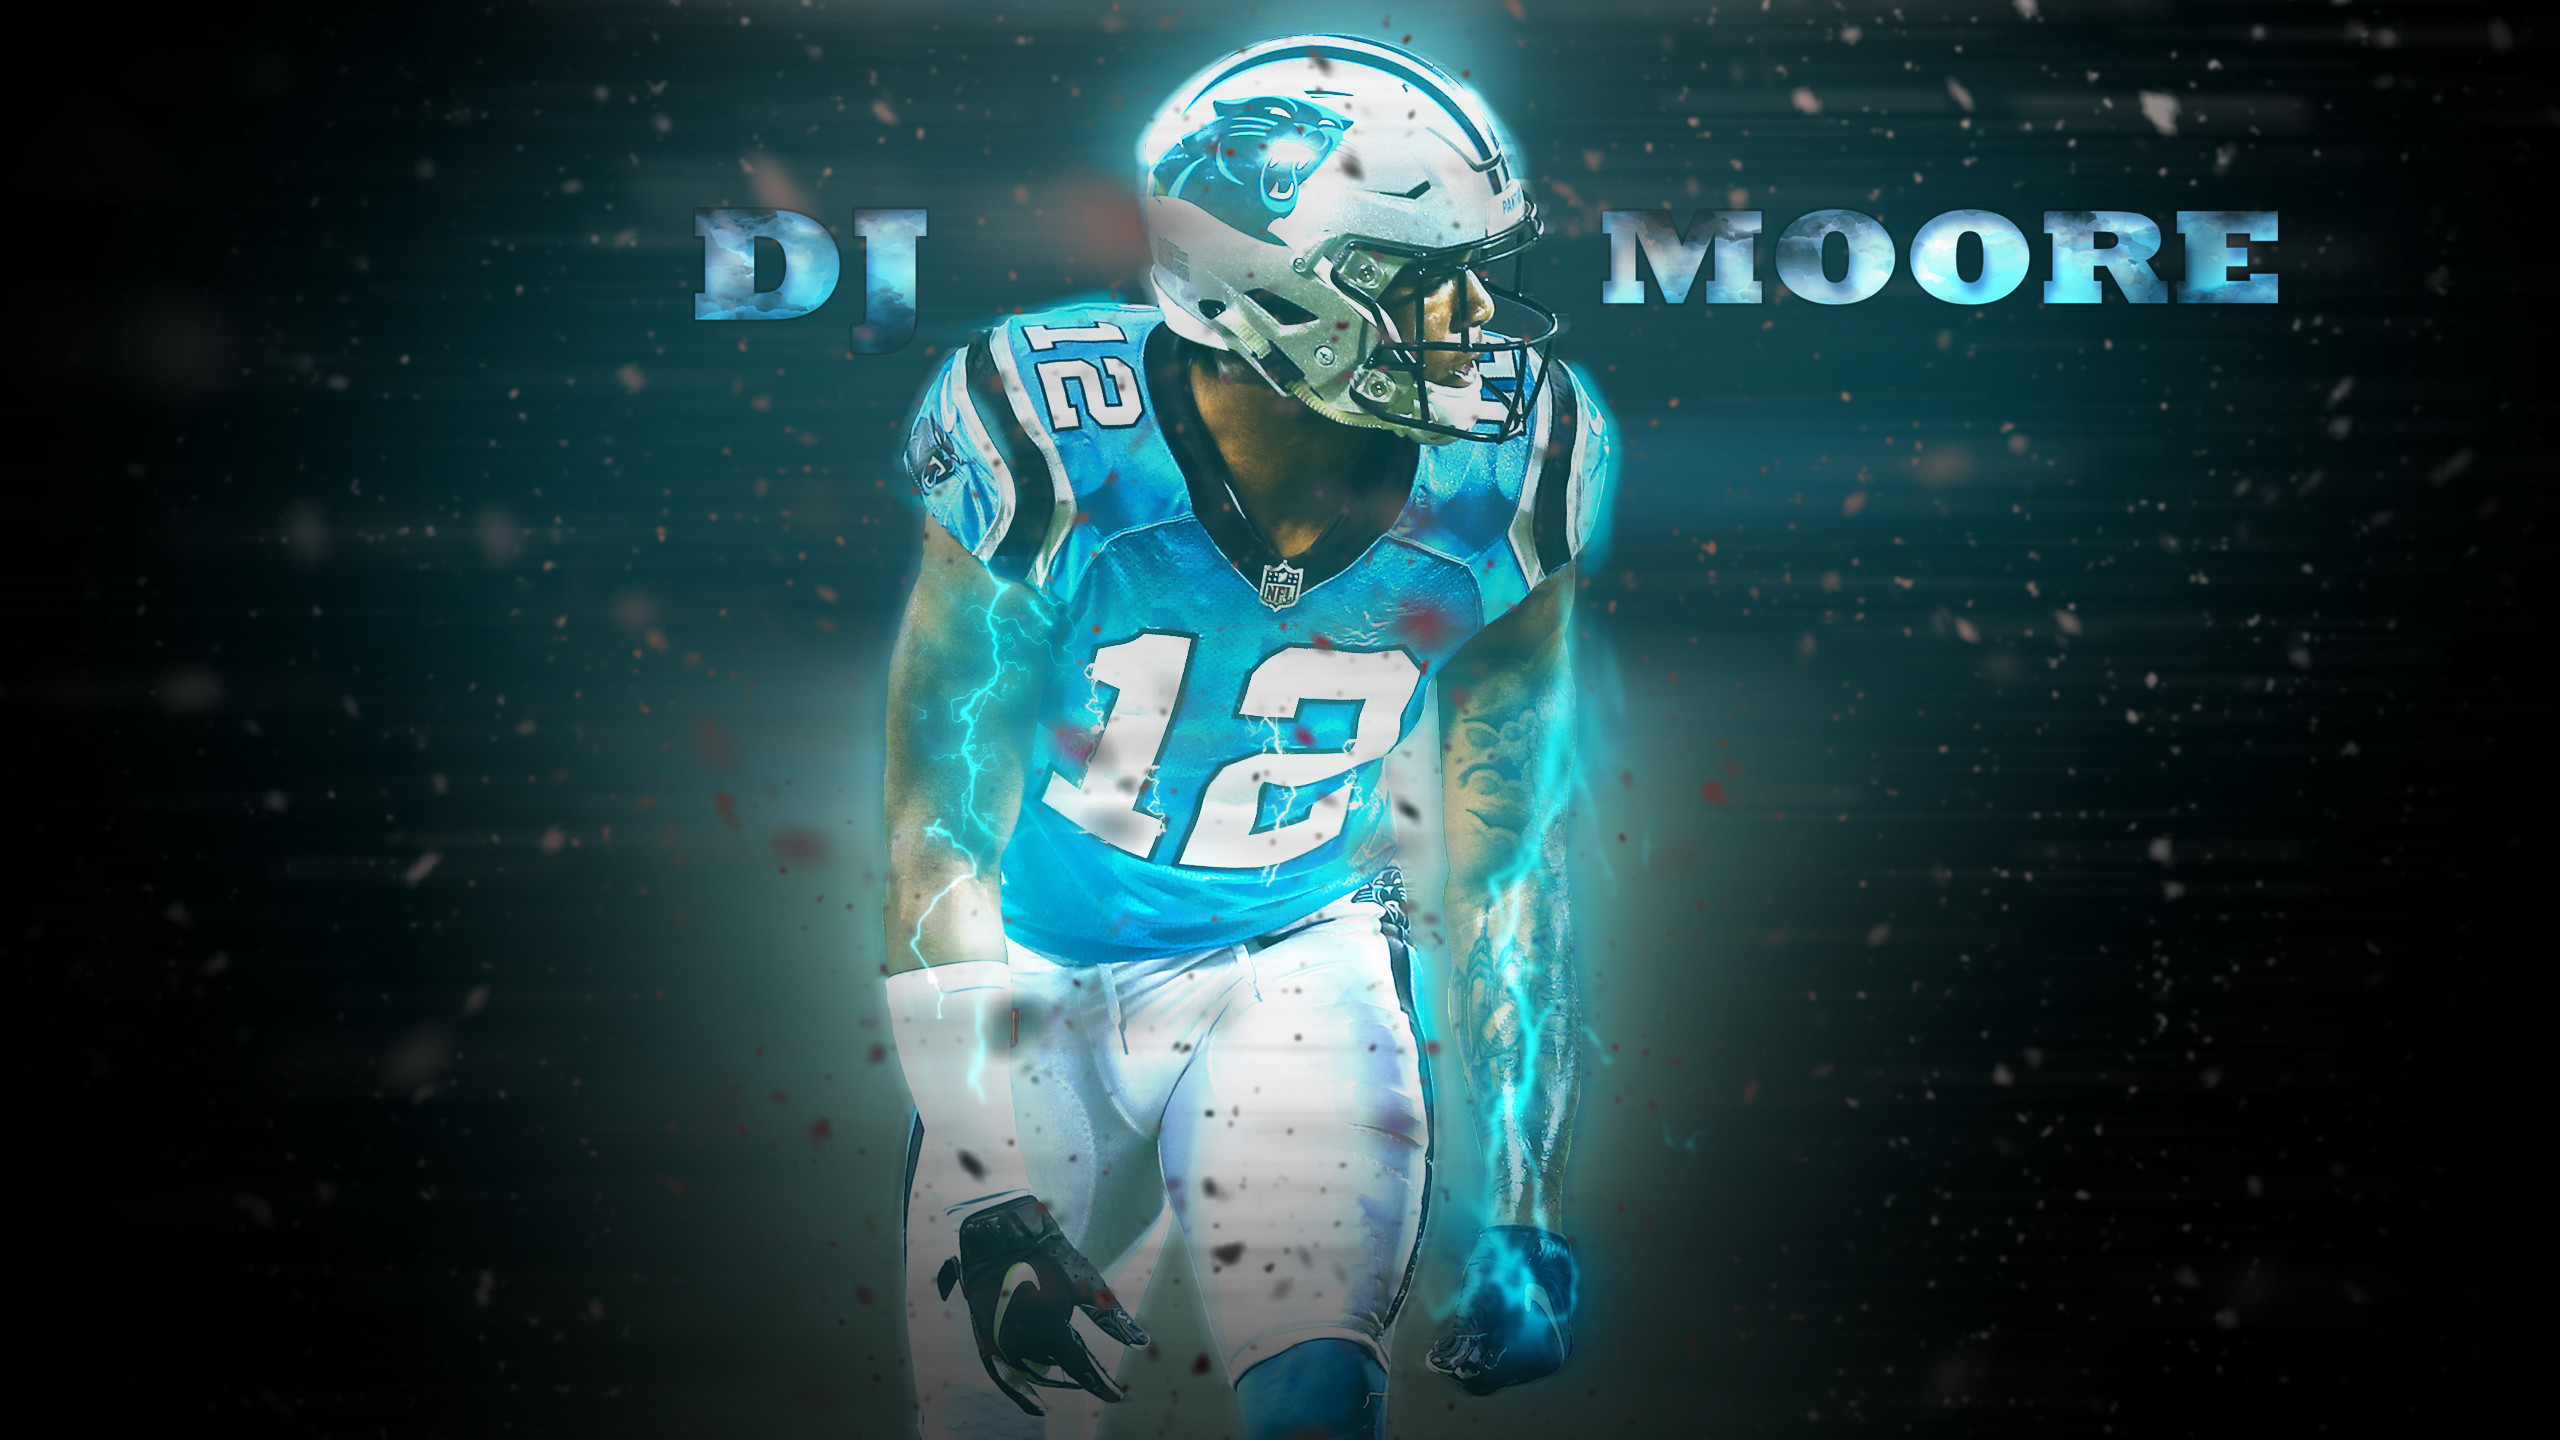 2560x1440 Got inspired by the Cam Newton Wallpaper, so I cooked a few up!